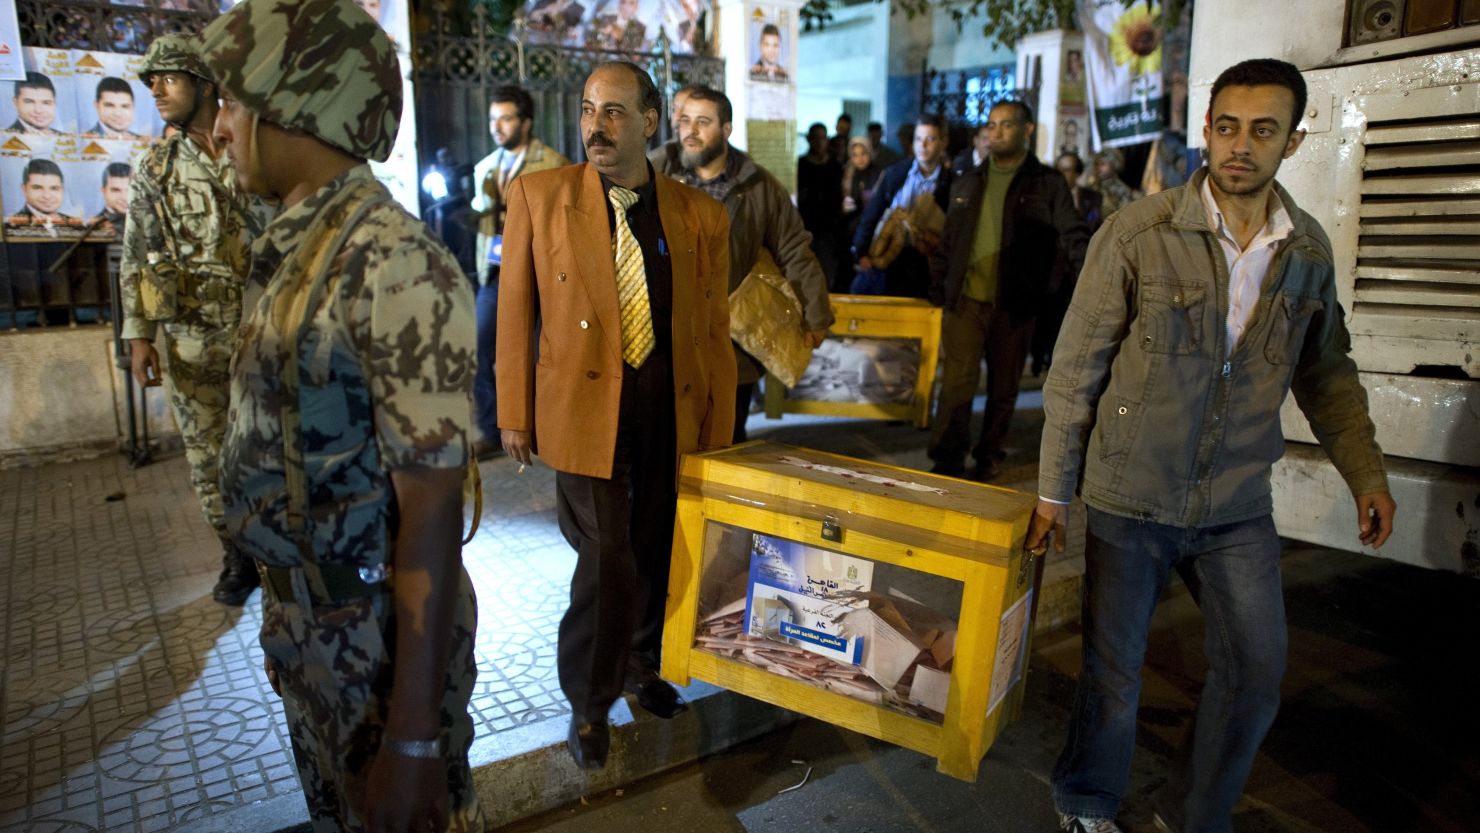 Election officials remove ballot boxes from a polling station near Tahrir Square at the end of the voting day in Cairo on Tuesday.